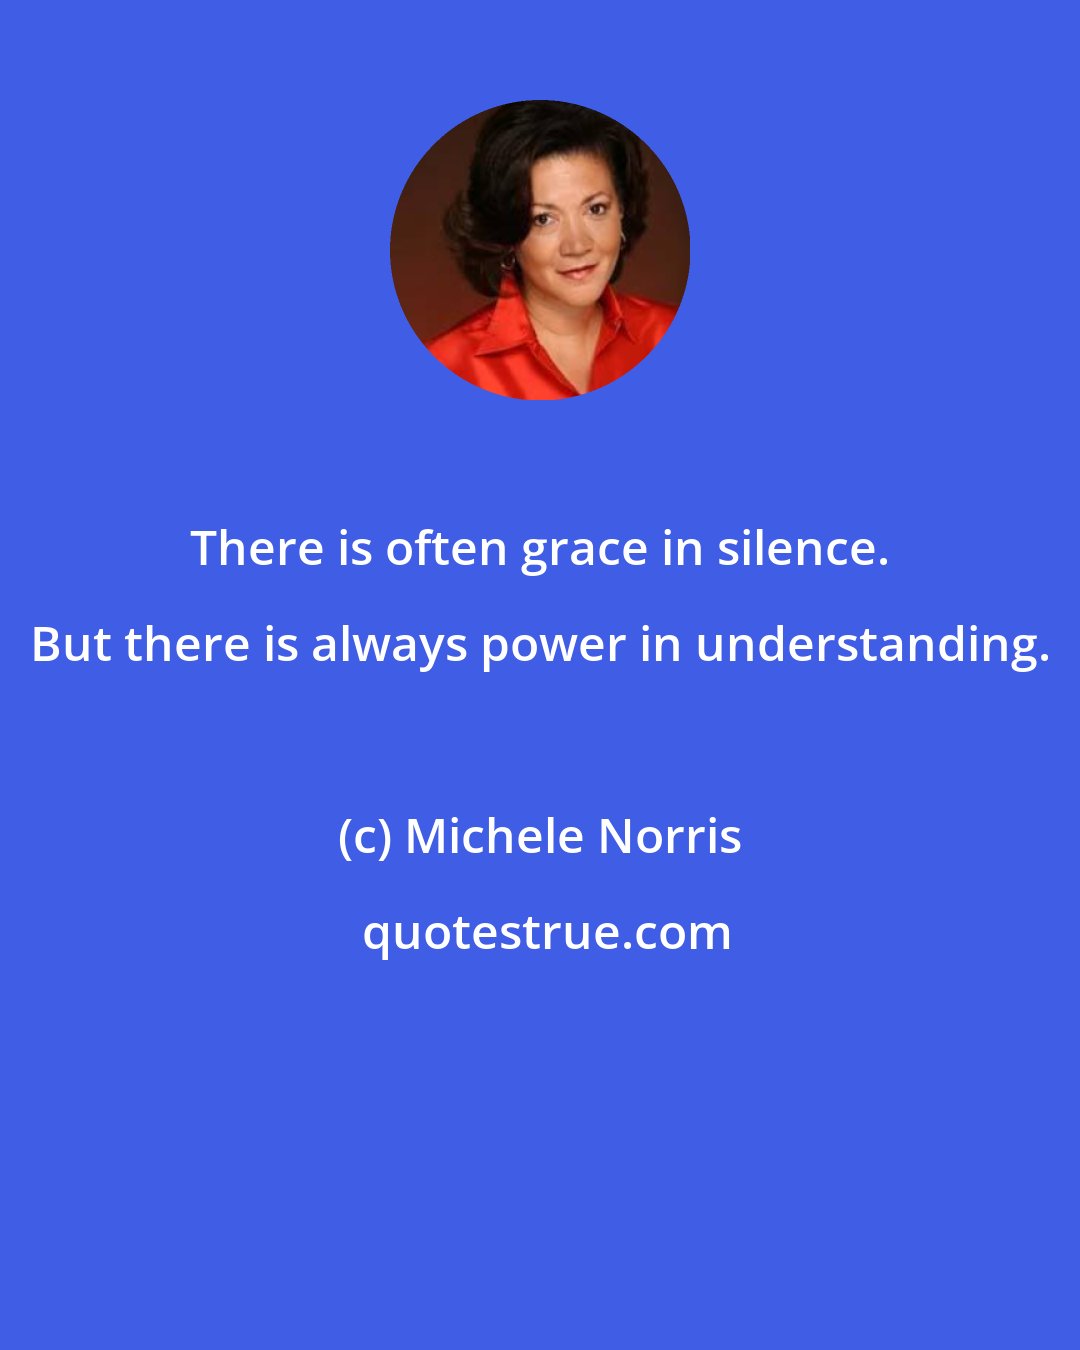 Michele Norris: There is often grace in silence. But there is always power in understanding.